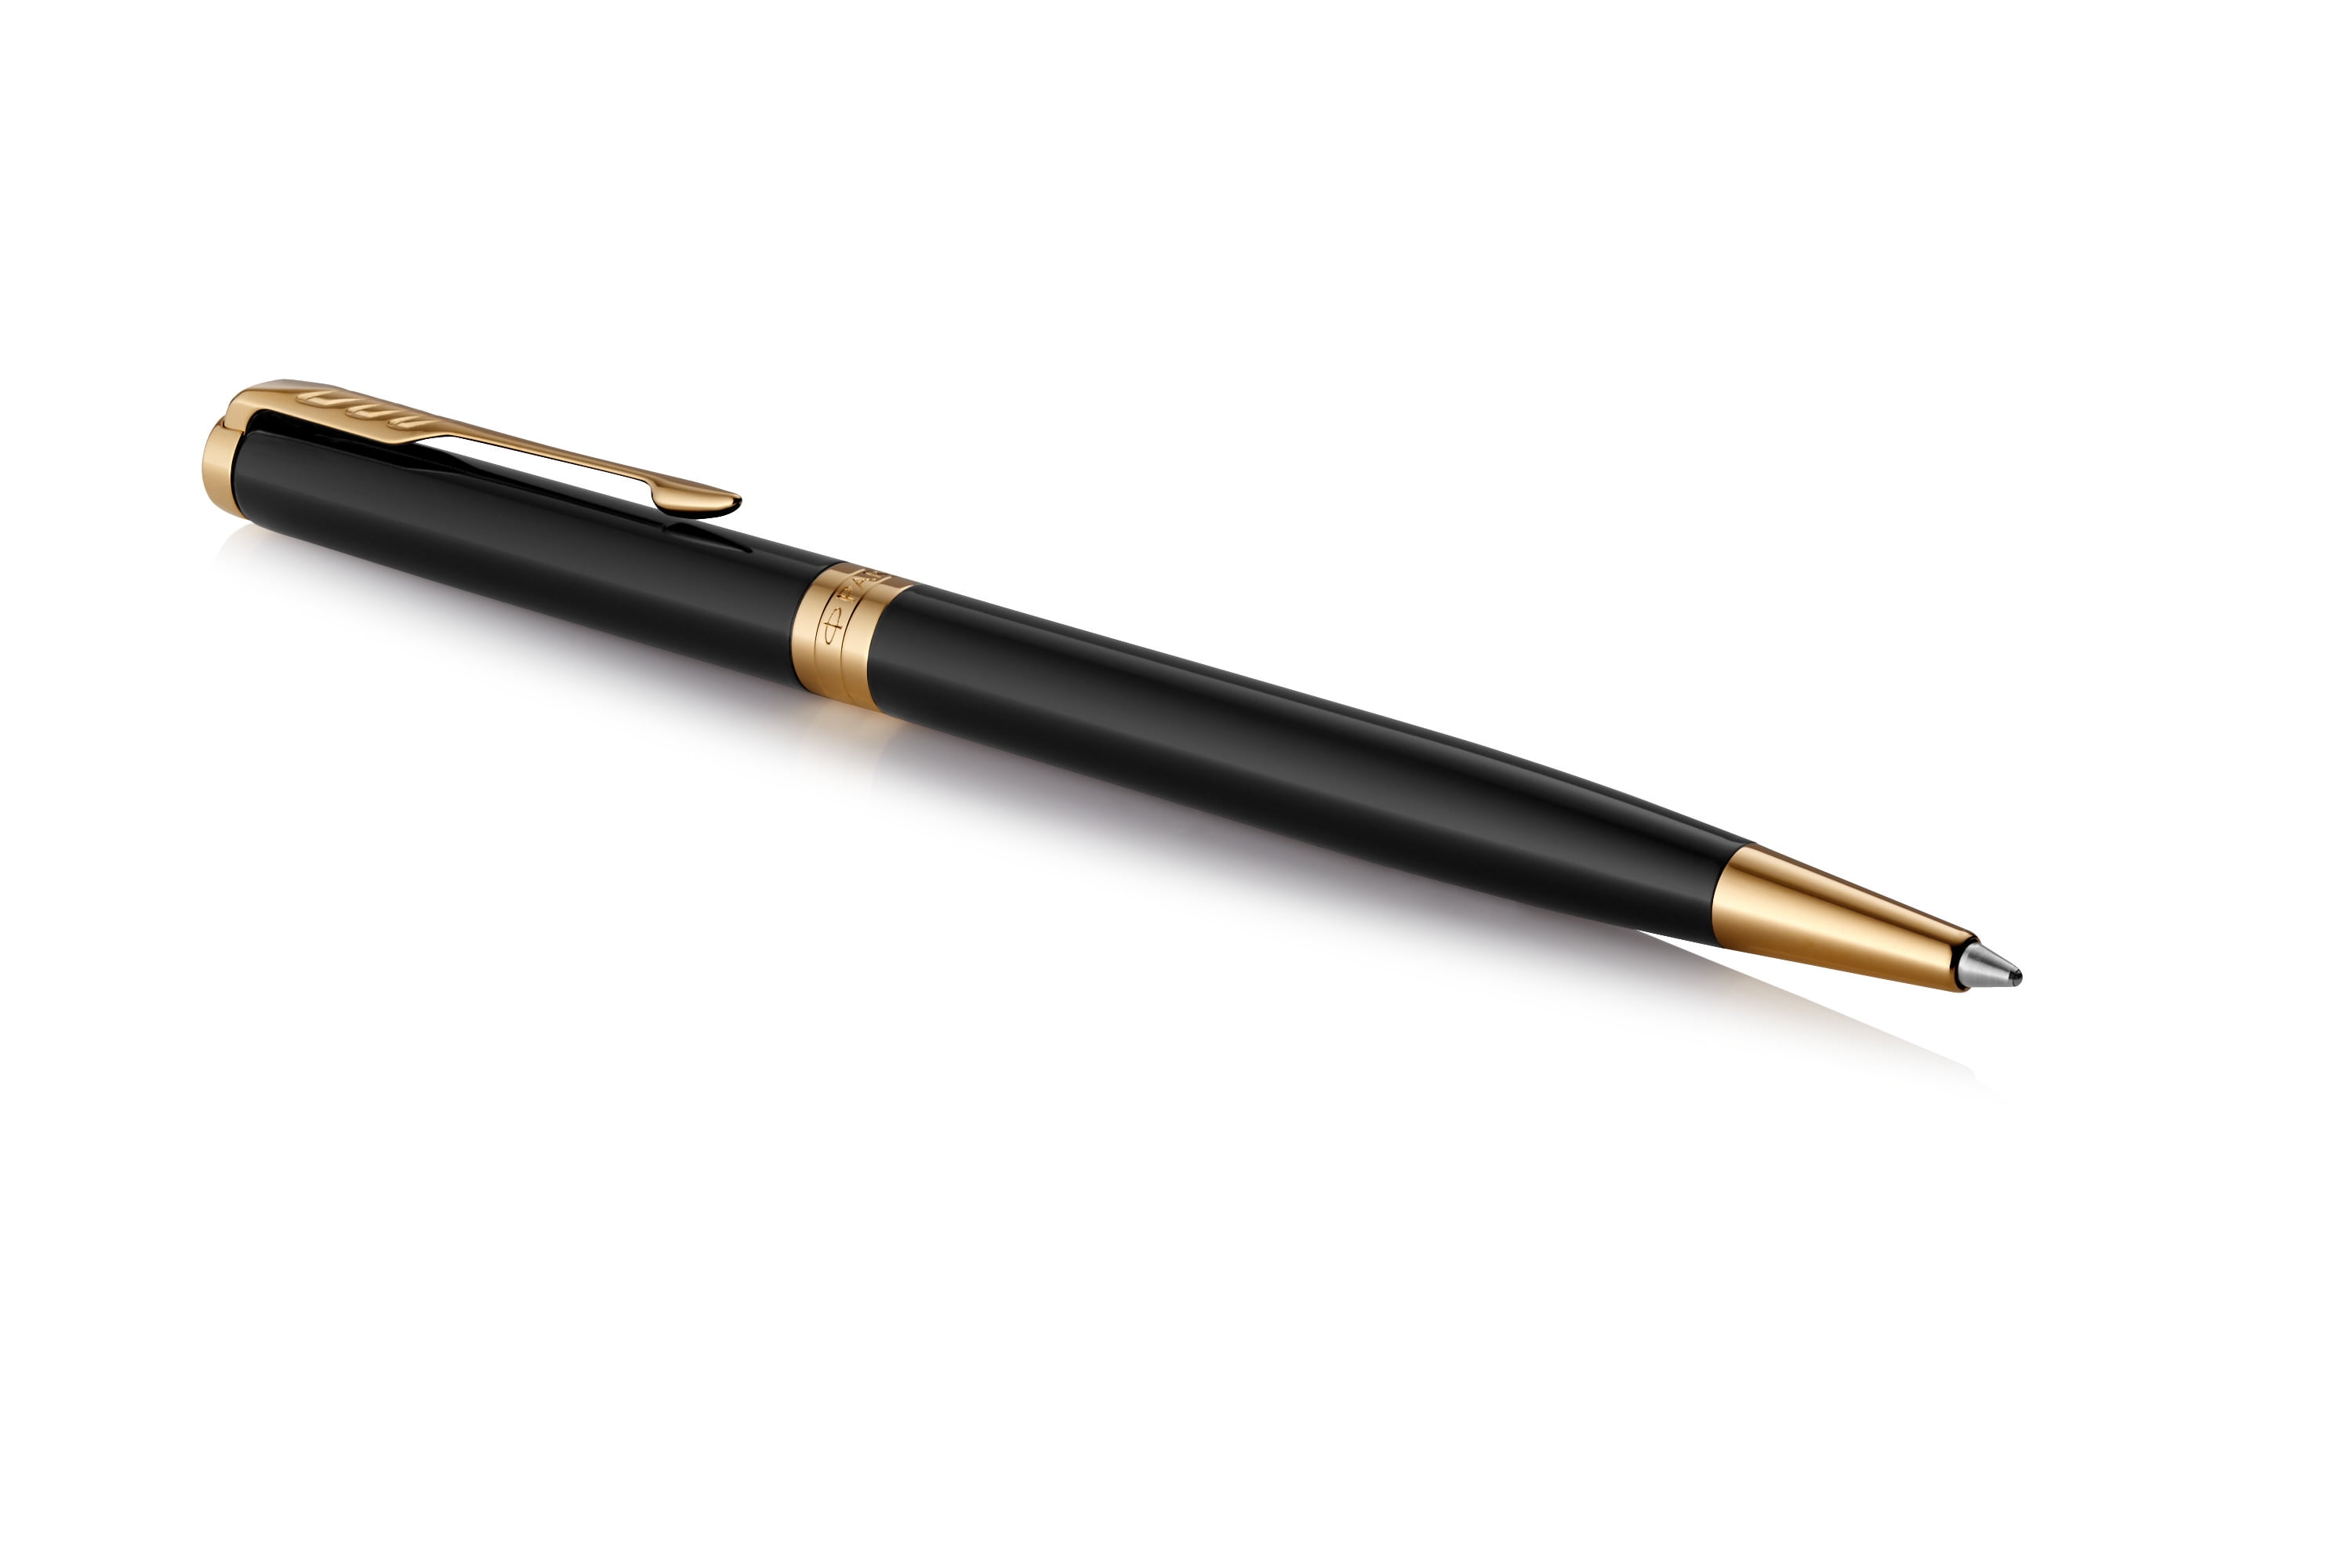 NEW PARKER CLASSIC MATTE BLACK GOLD TRIM BALL PEN WITH FREE WORLDWIDE SHIPPING 